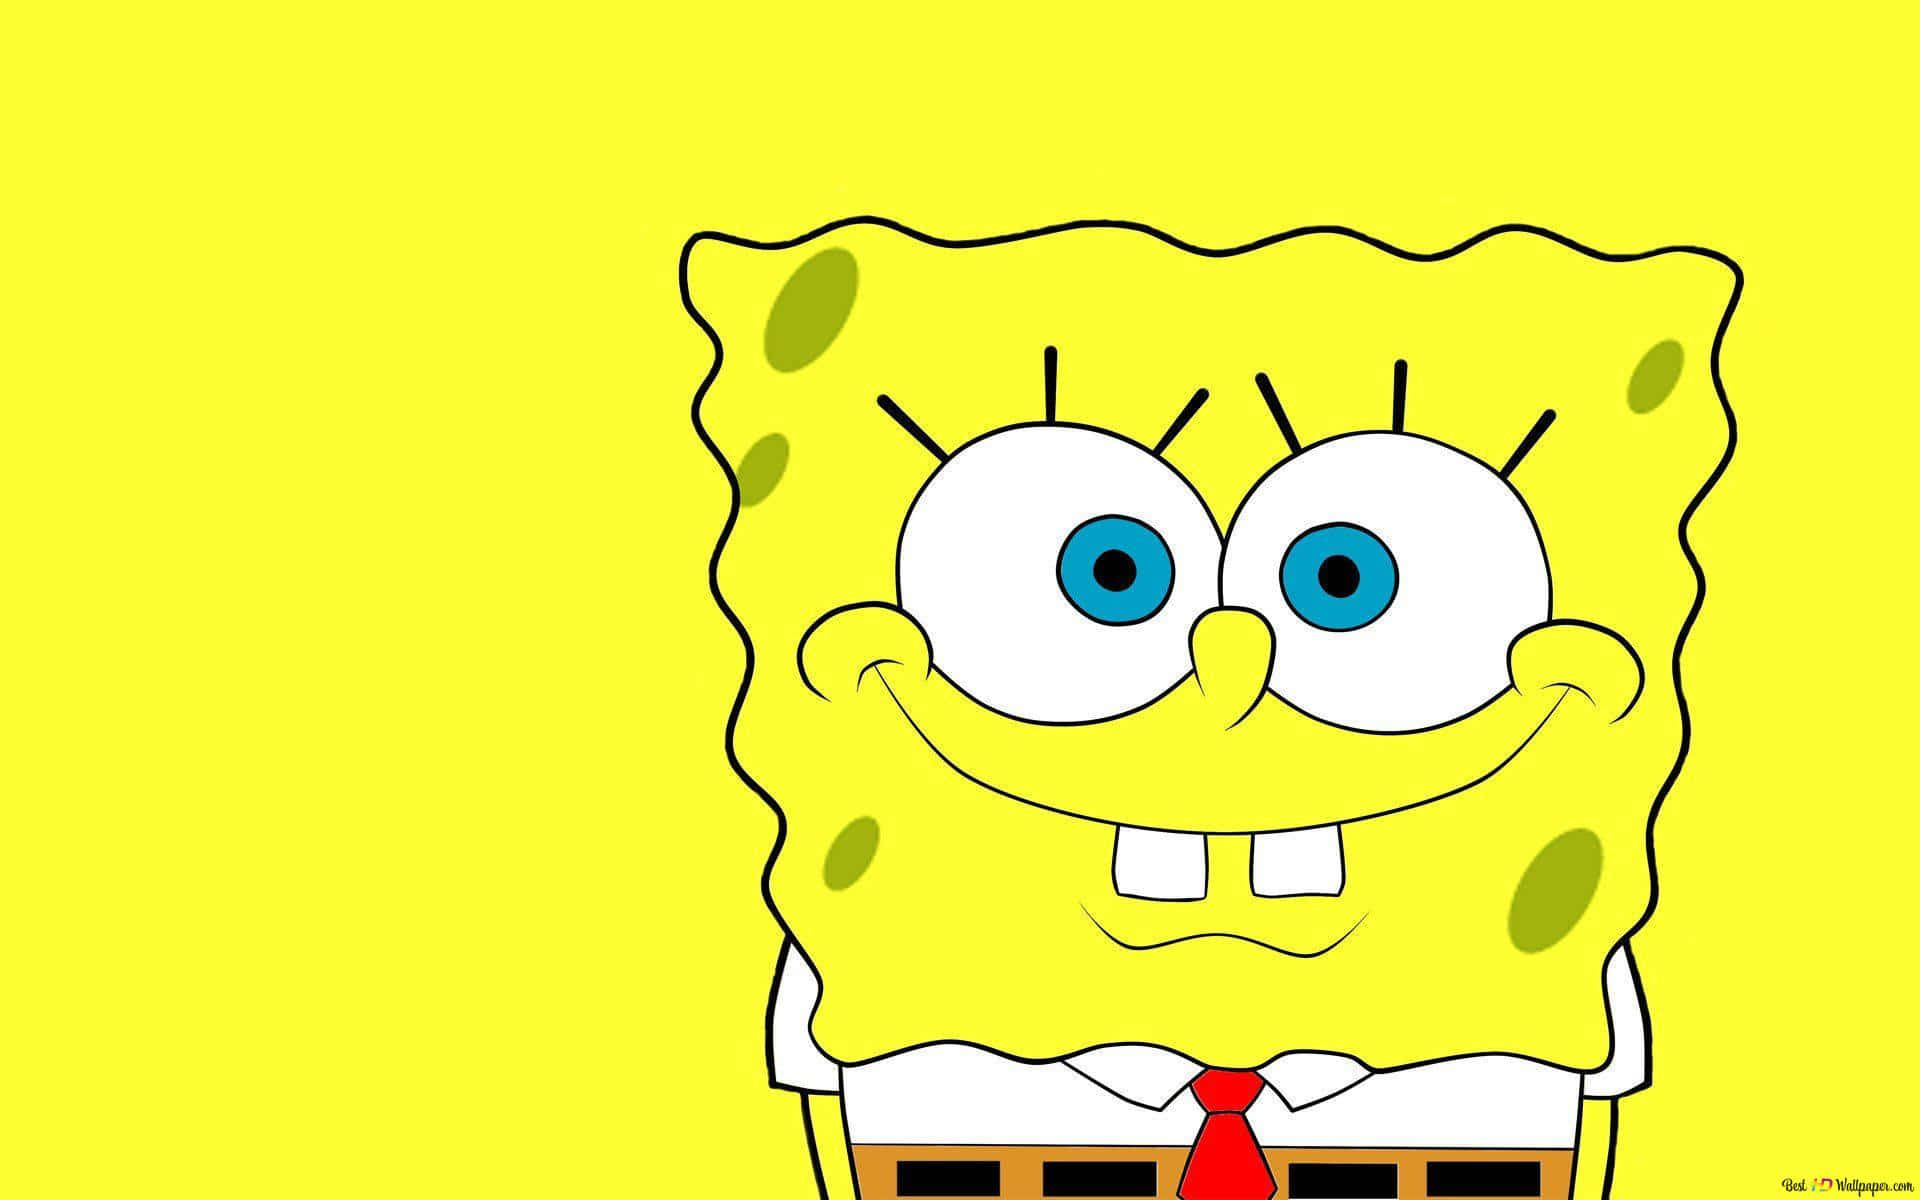 Get ready to laugh out loud with Spongebob and his unique friends! Wallpaper